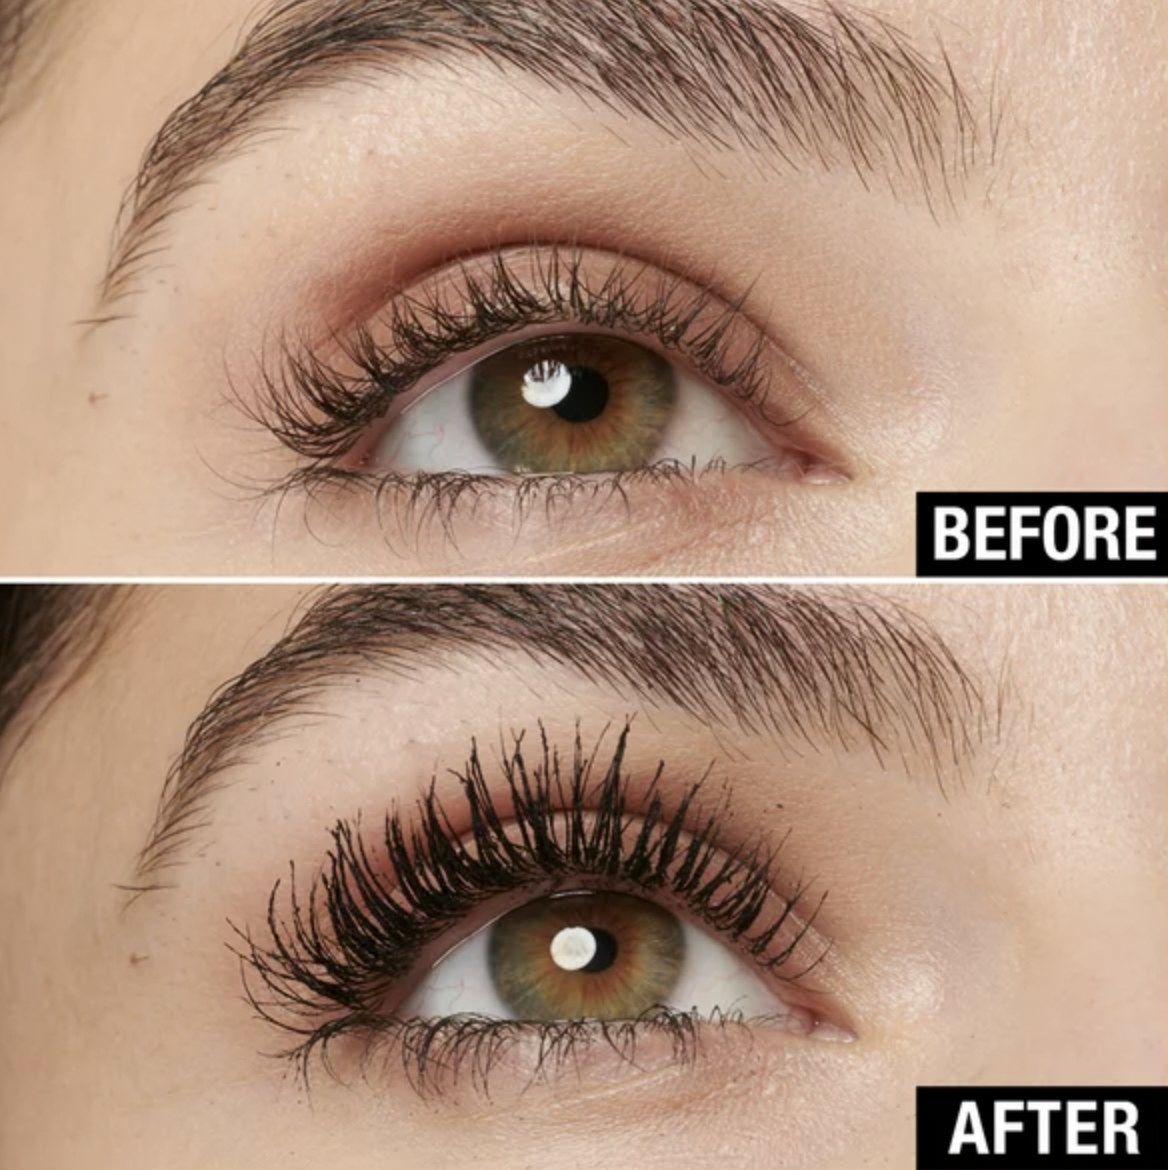 A model before and after using the mascara